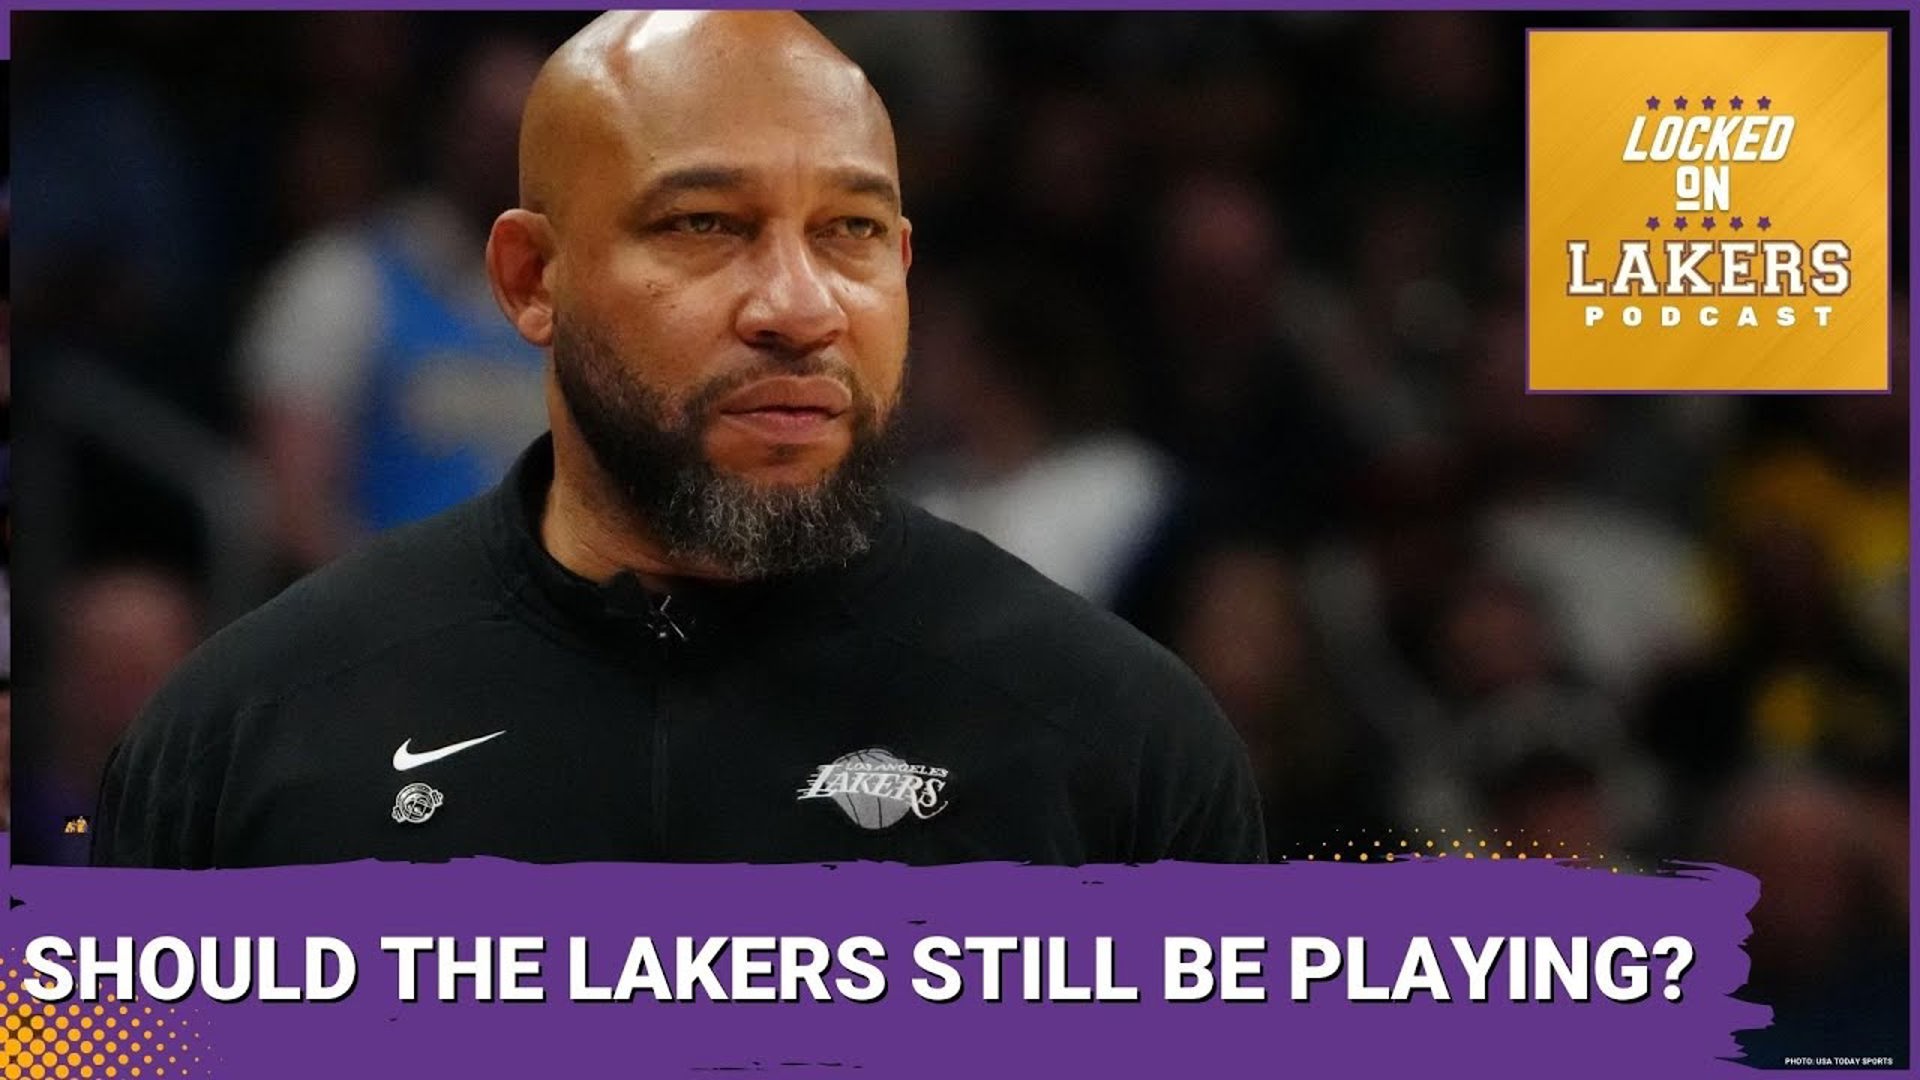 As the Lakers were losing (again) to the Denver Nuggets in the first round of the NBA Playoffs, it felt the deficit couldn't be placed entirely at the feet of Ham.